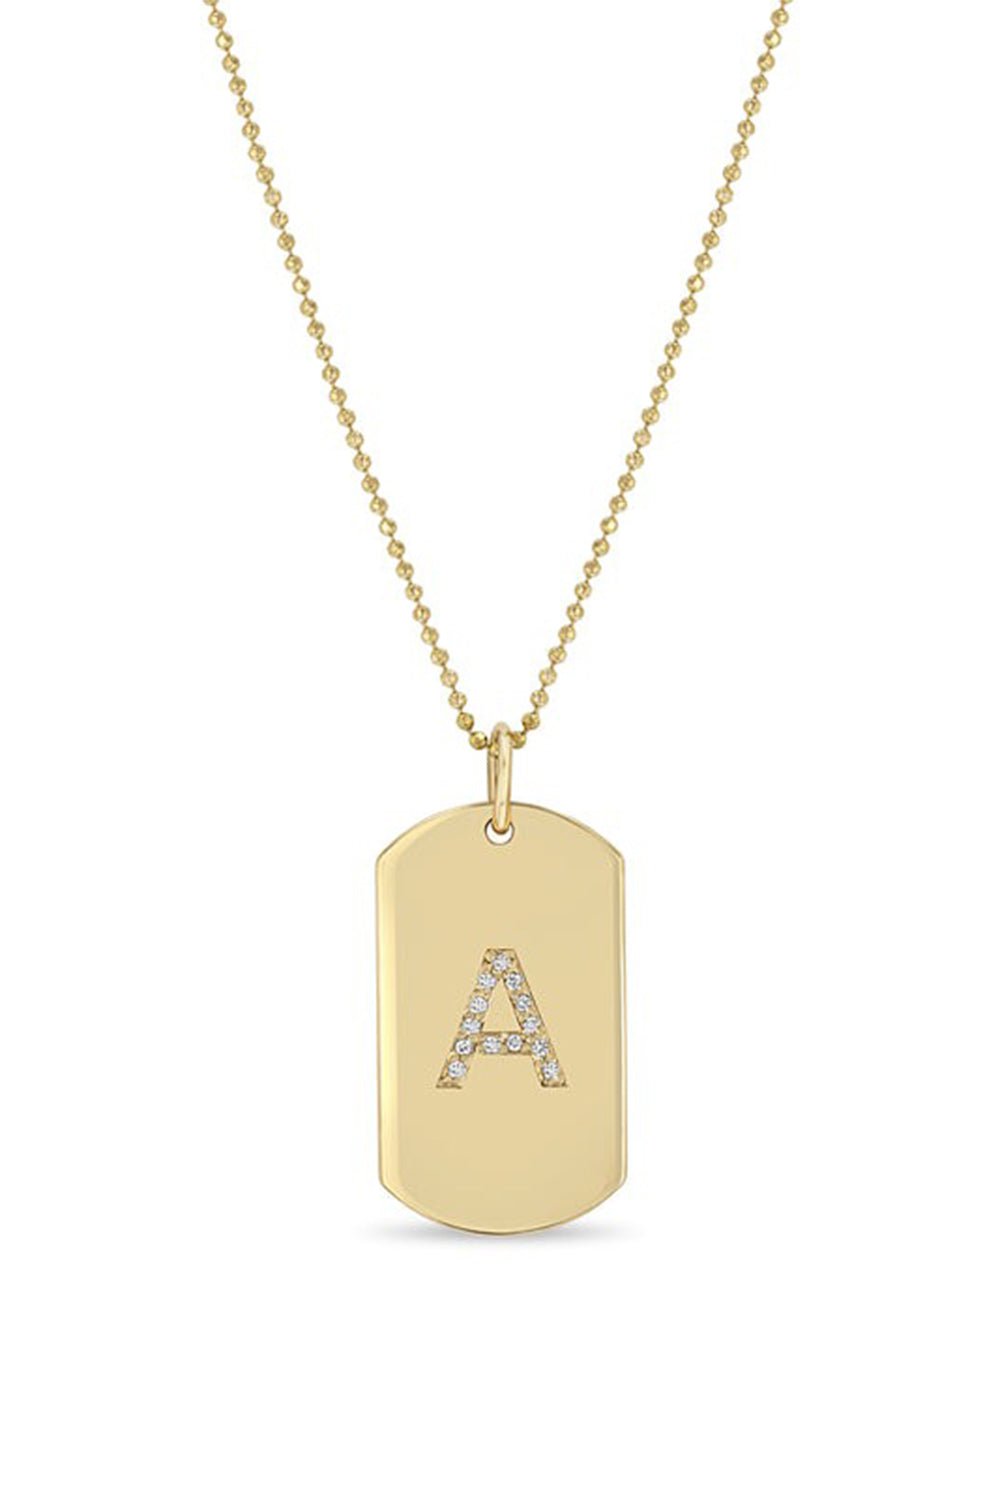 ZOE CHICCO-Diamond Initial Dog Tag Necklace-YELLOW GOLD